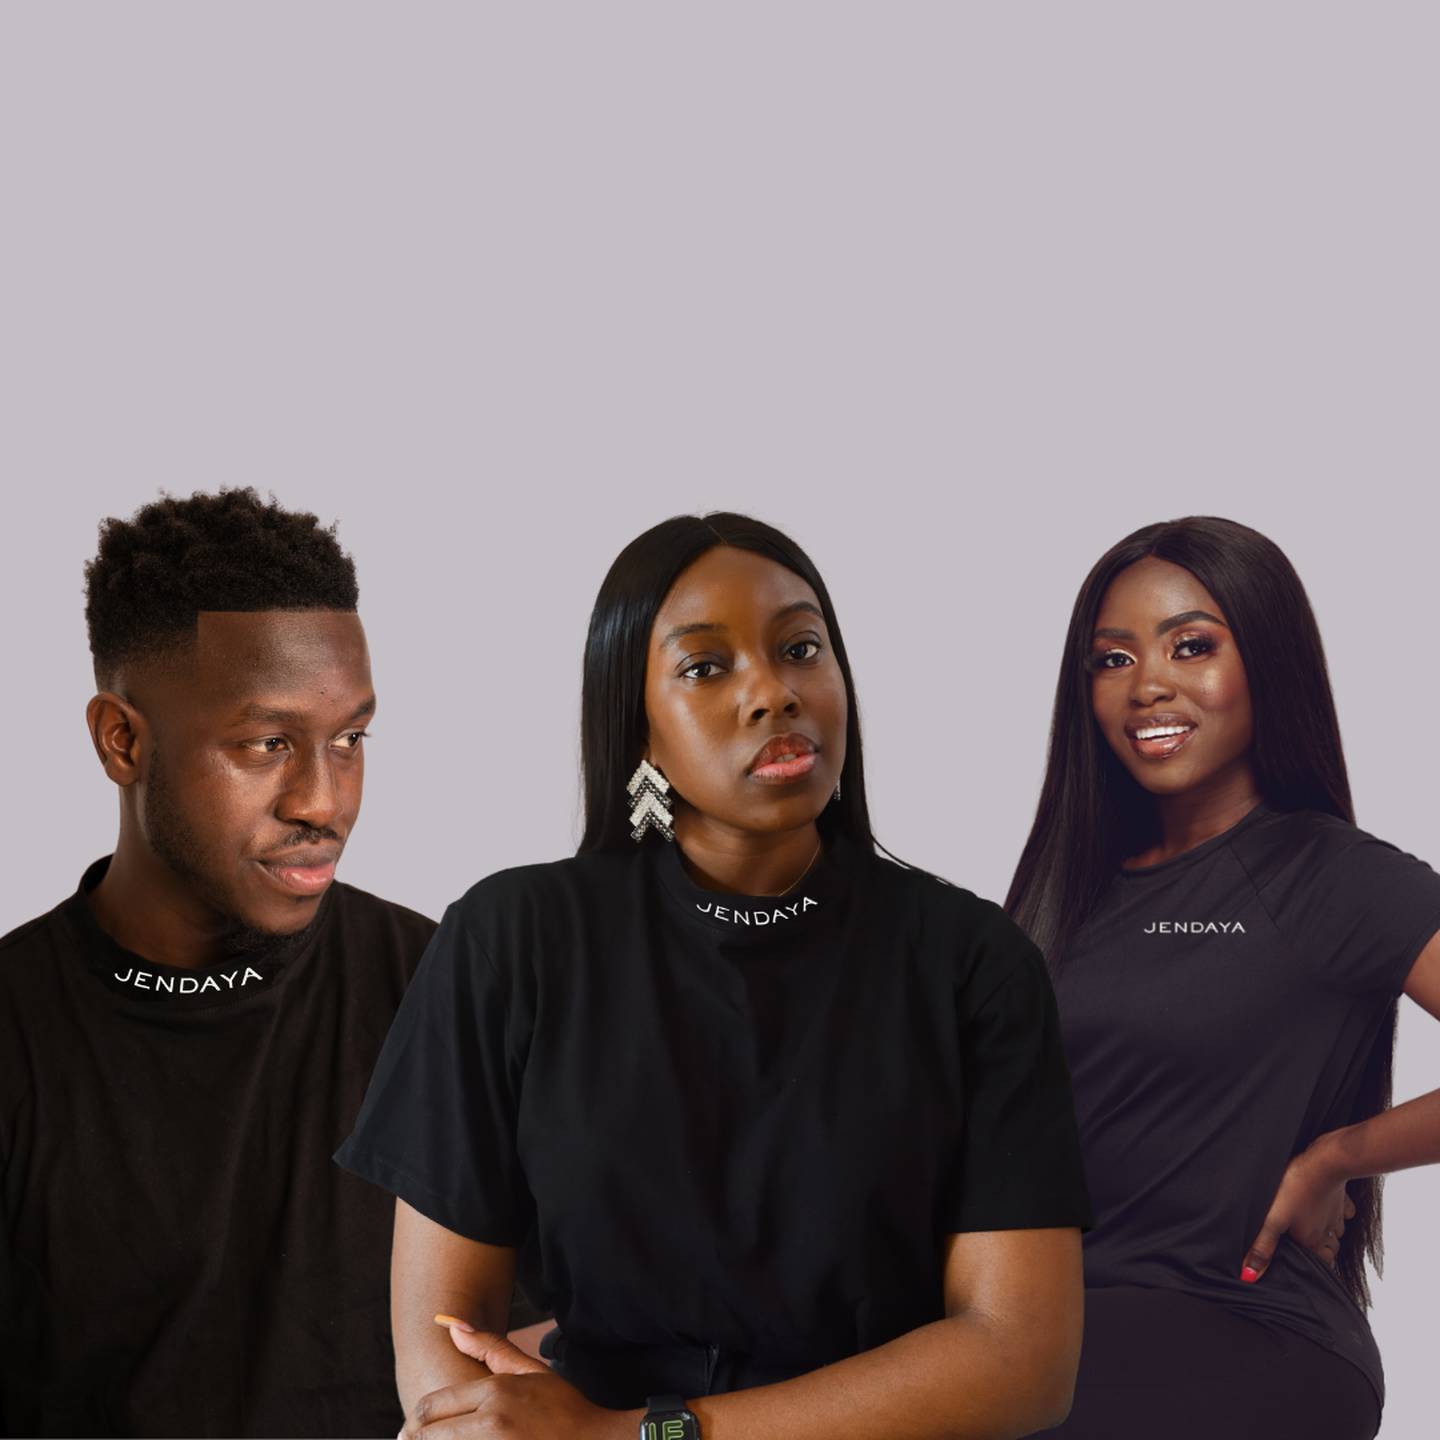 Jendaya Is The E-commerce Platform Serving Africa’s Fashion Forward Consumers